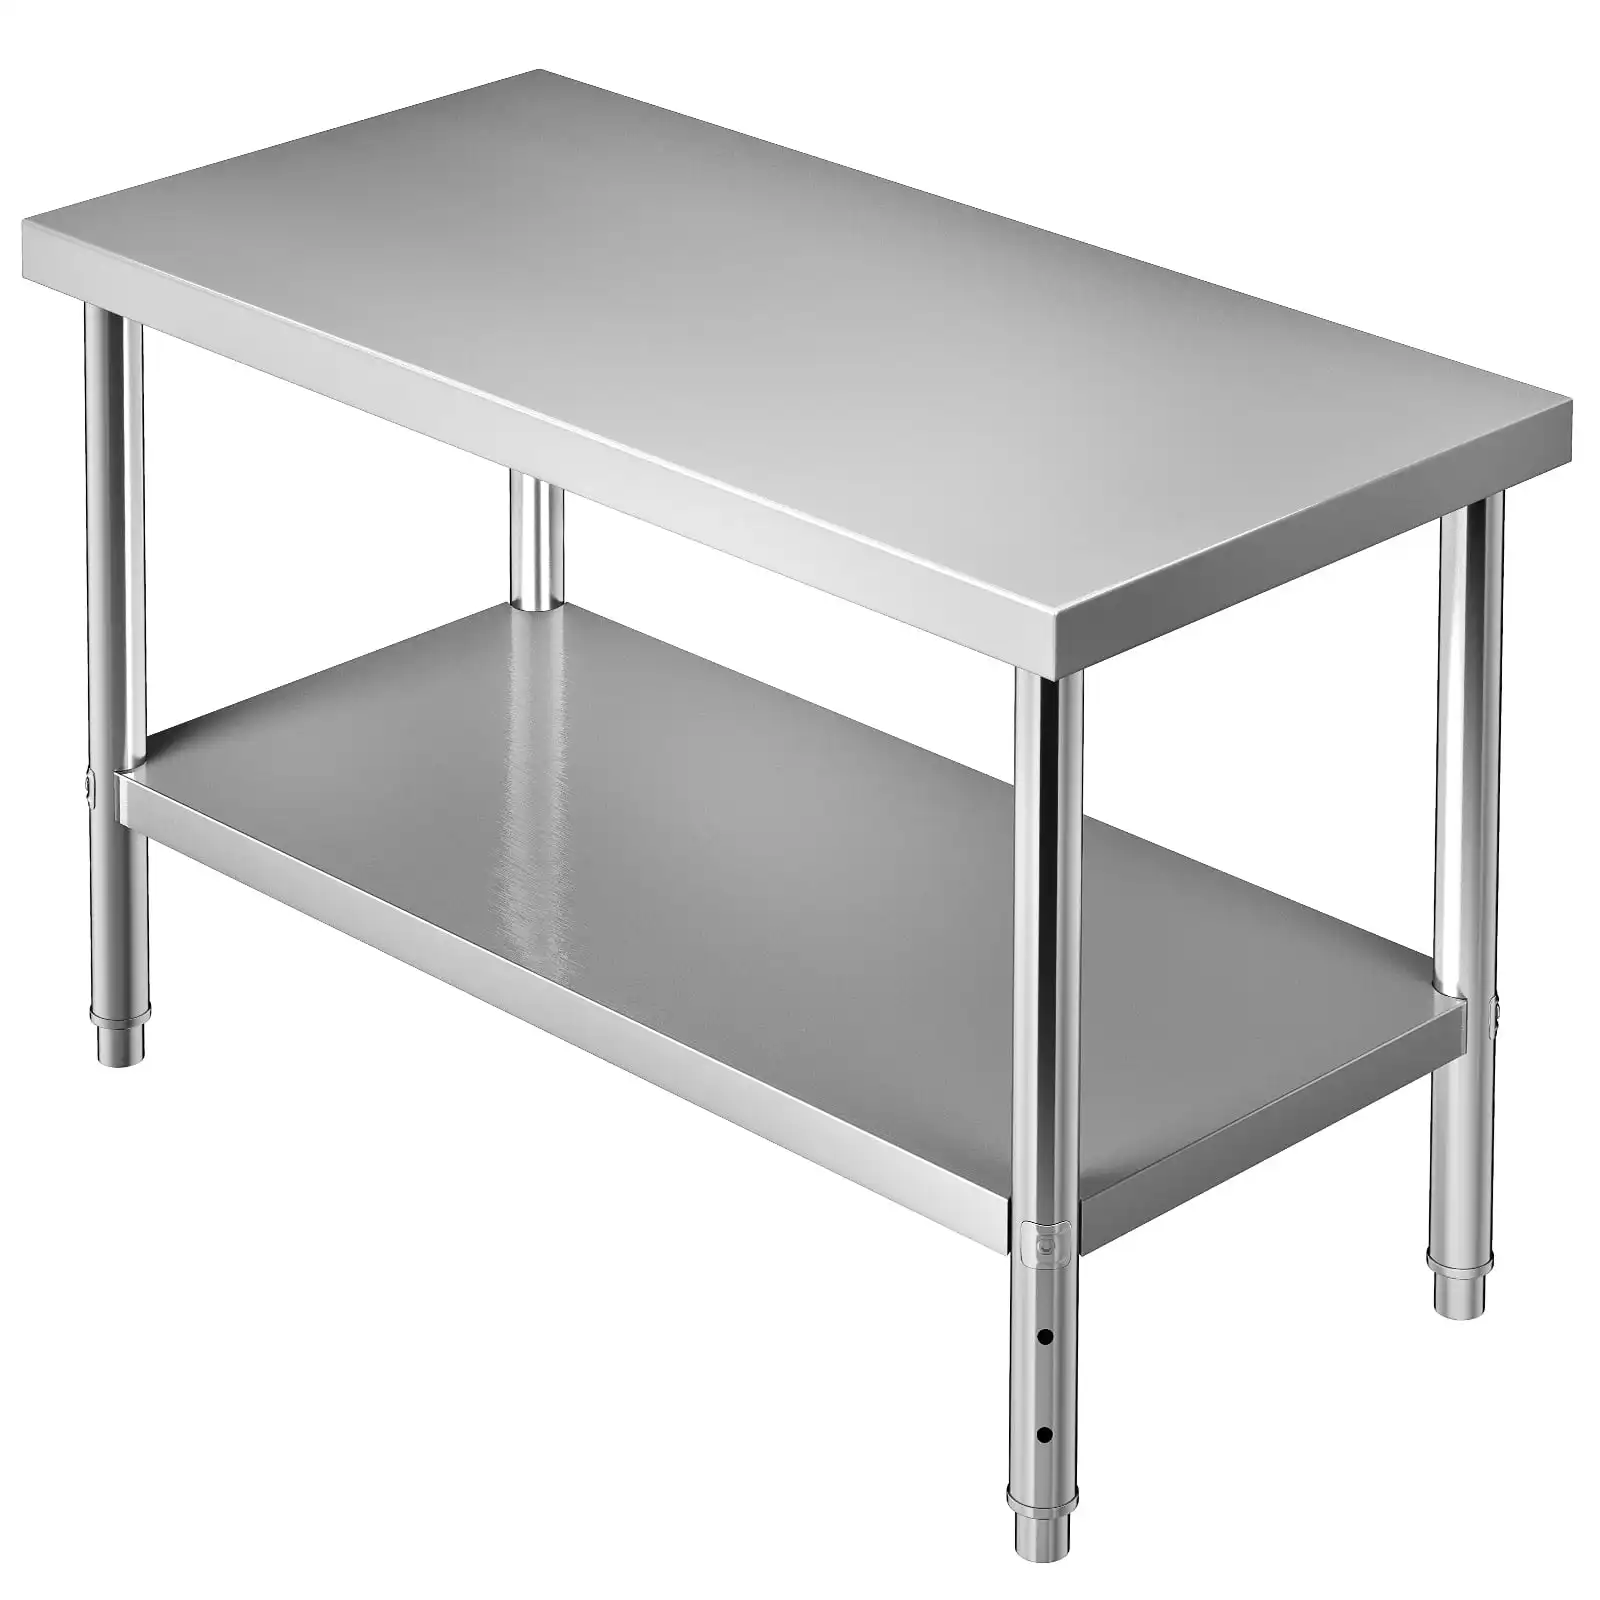 

VEVOR Outdoor Food Prep Table, Stainless Steel Work Table with 2 Adjustable Undershelf (2-L 48 x 24 x 34 inch)